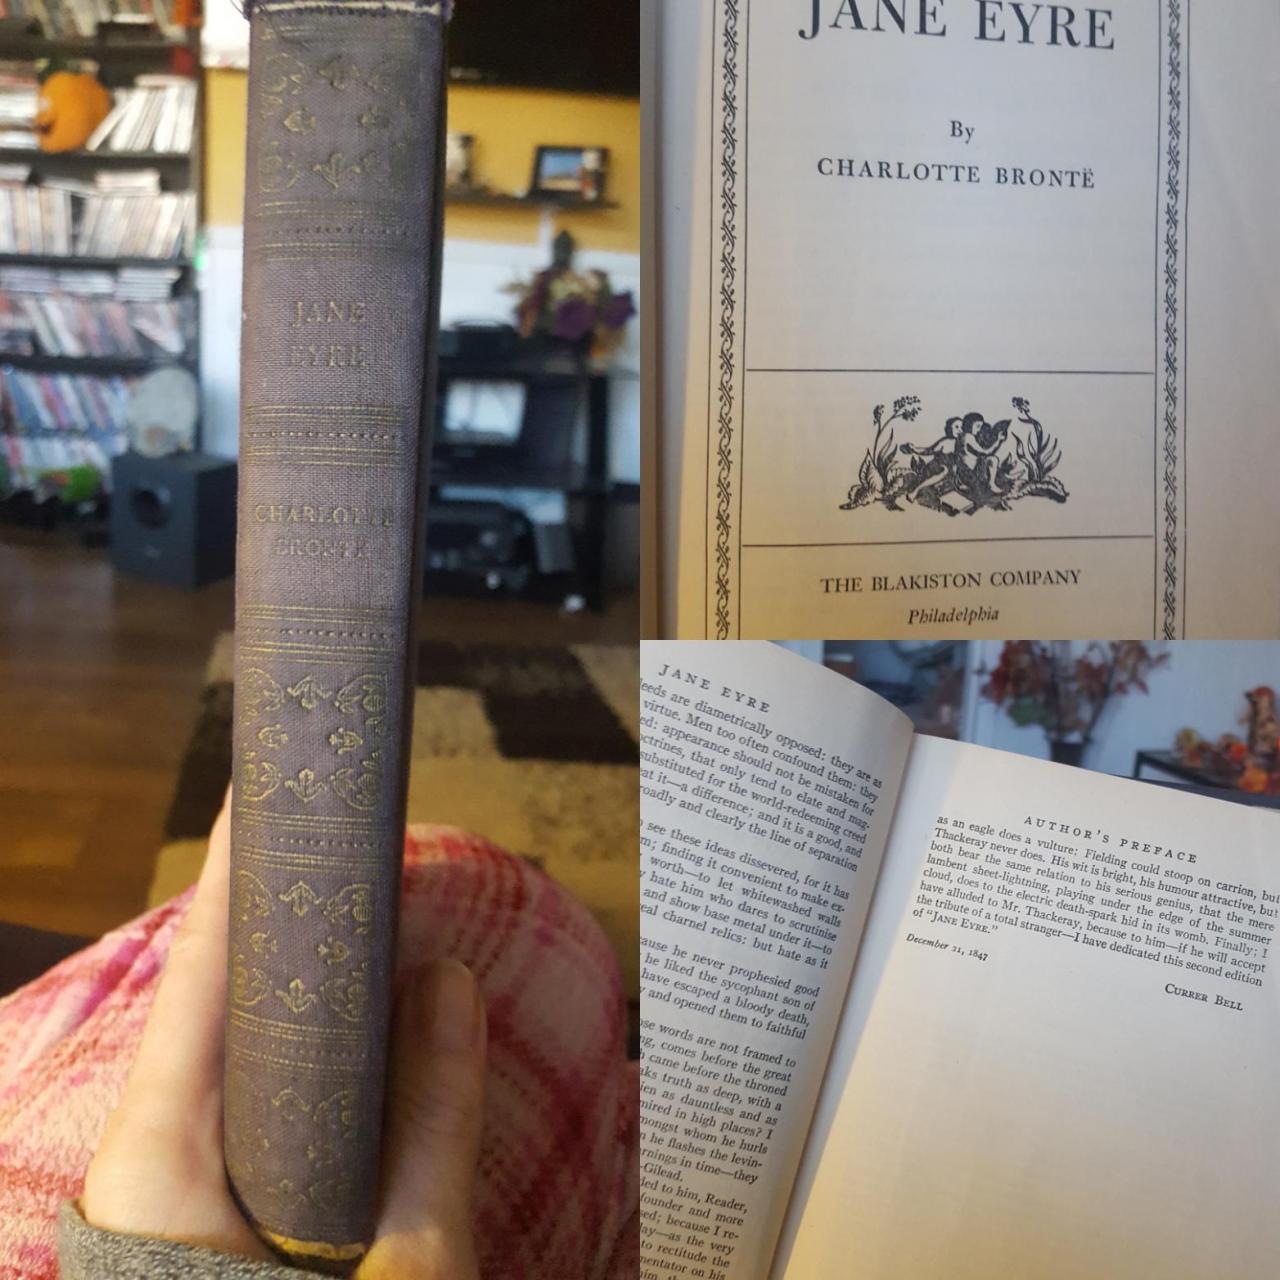 Hubby found this second edition Jane Eyre book at a thrift store. Just